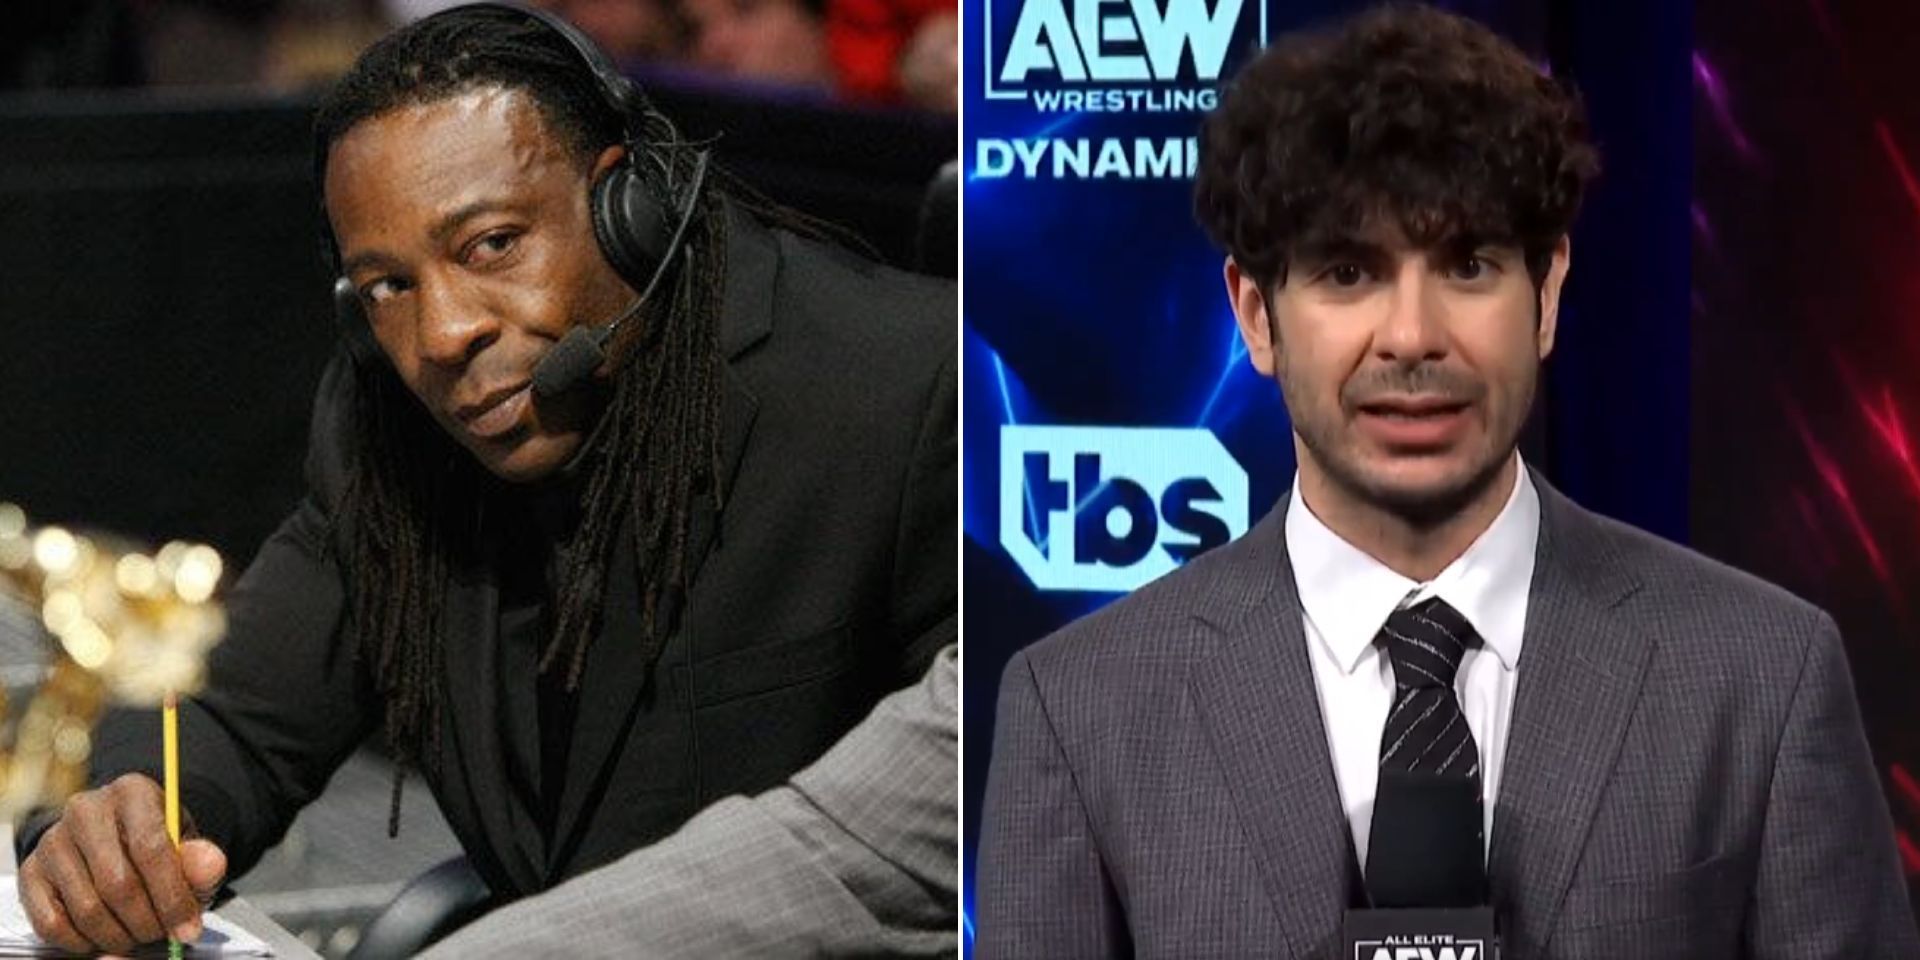 Booker T commented on Dynamite